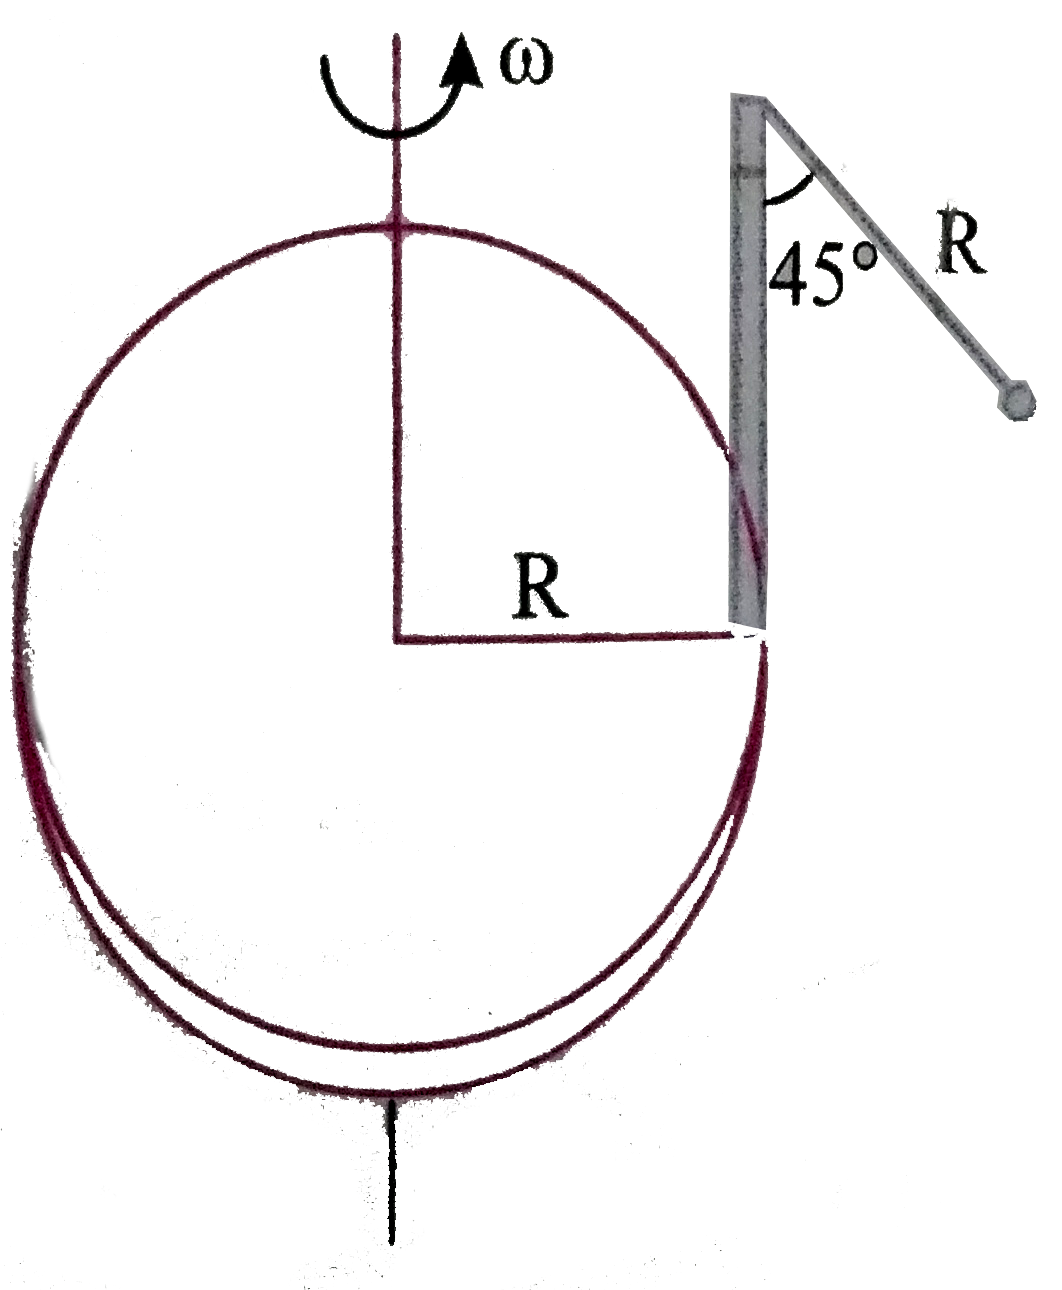 A disc of radius R has a light pole fixed perpendicular to the disc at its periphery whish in turn has a pendulum of legth R attached to its other end as shown in figure. The disc is rotated with a constant angular velocity omega The string is making an angle 45^(@) with the rod. Then the angular velocity omega of disc is